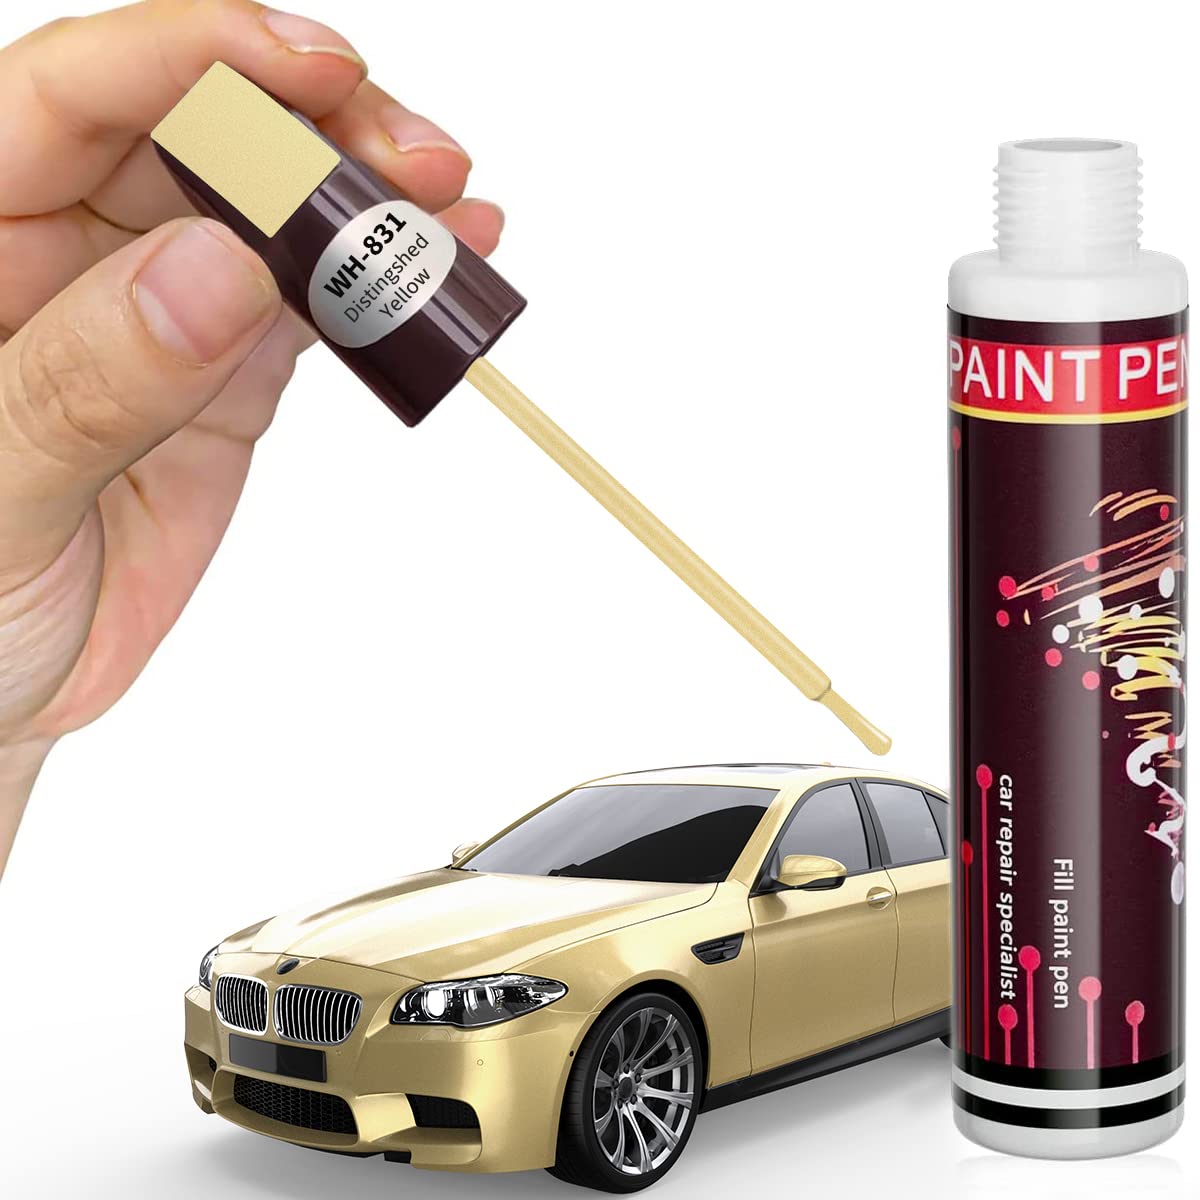 Depino Touch Up Paint Pen For Cars Scratch Removal Repair, Wheel Fill Paint Pen Blackwhitemulti-Color Optional For Various Cars (Champa